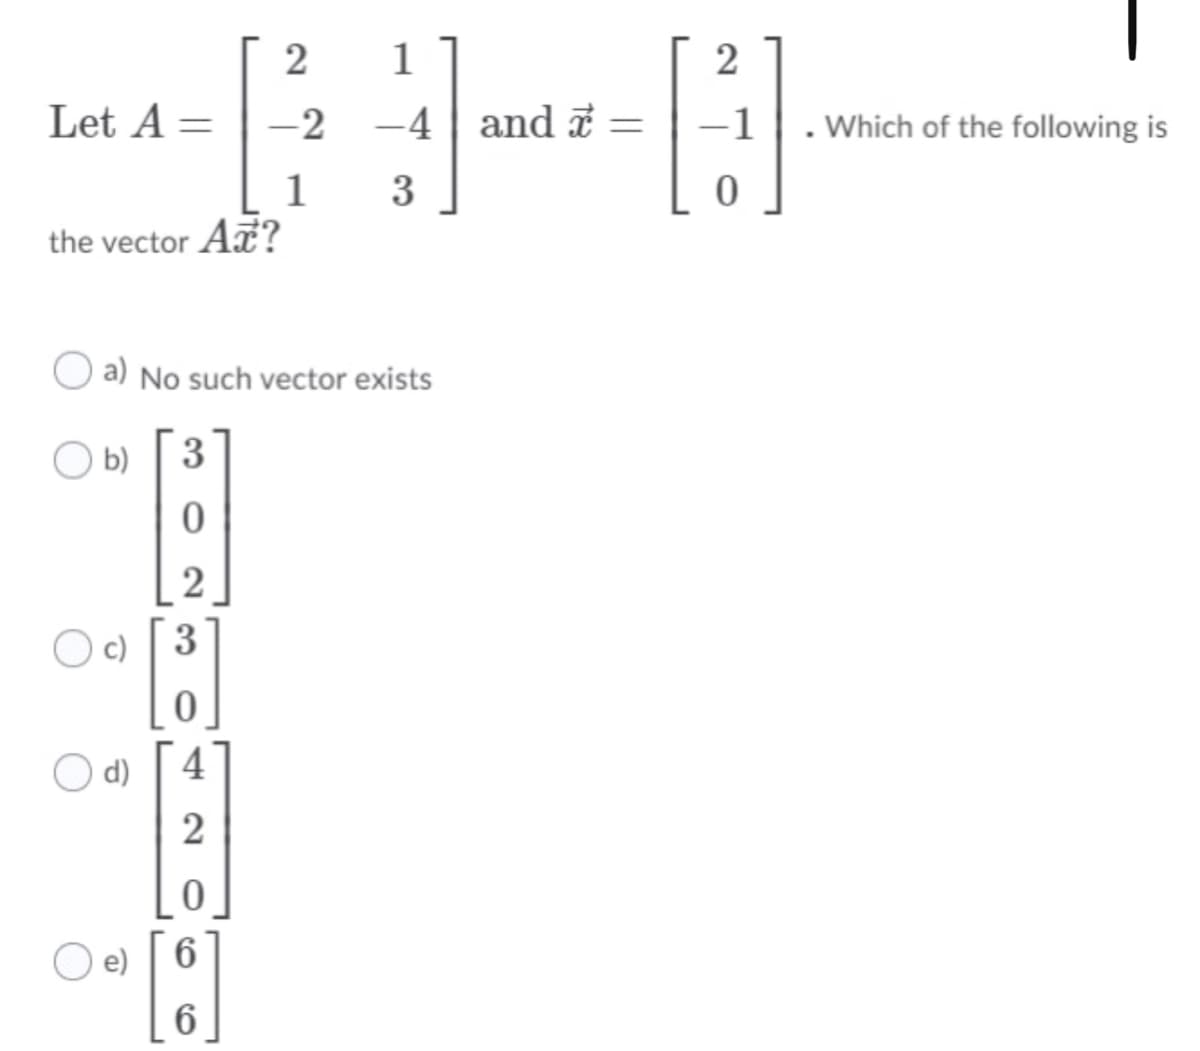 2
1
Let A = | -2 -4 | and i =
-1
Which of the following is
1
3
the vector A?
O a) No such vector exists
O b)
3
c)
3
d)
4
2
e)
6.
6
